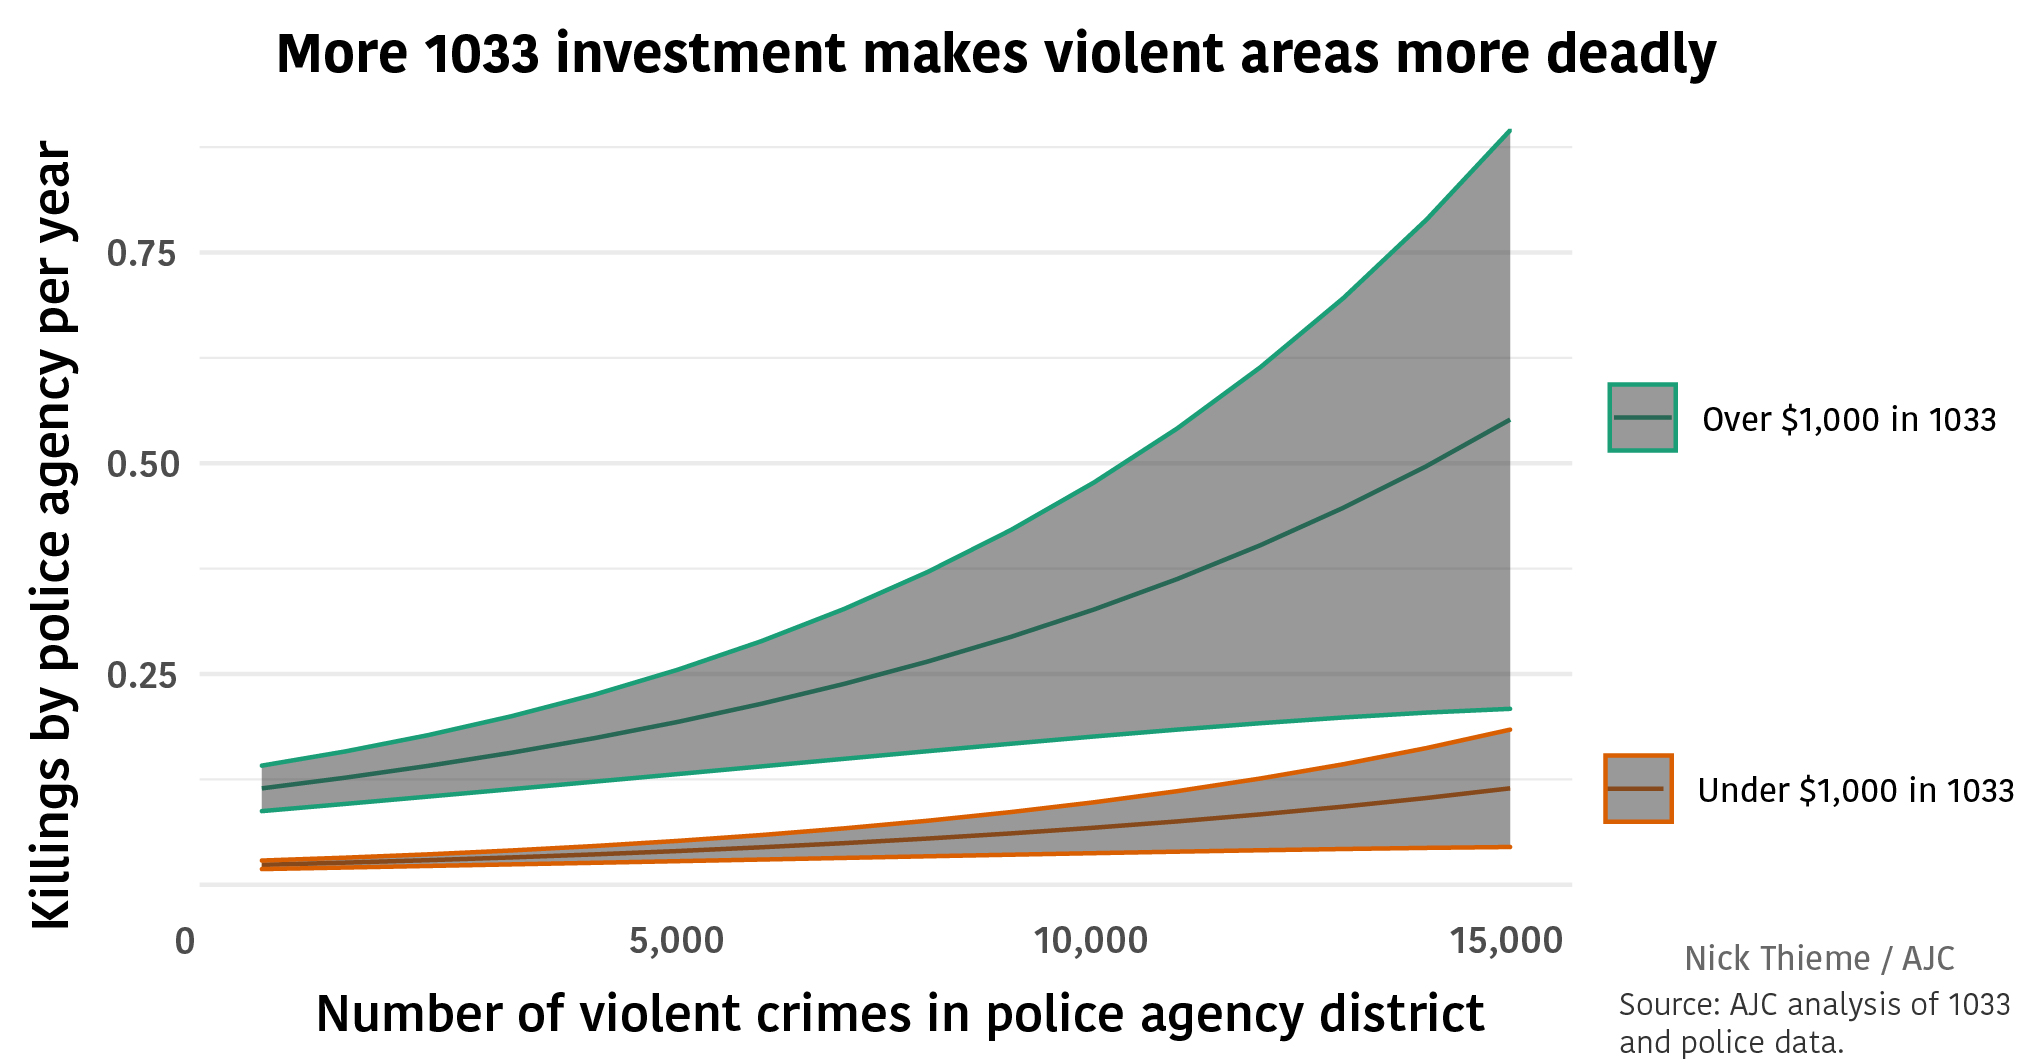 More 1033 investment makes violent areas more deadly